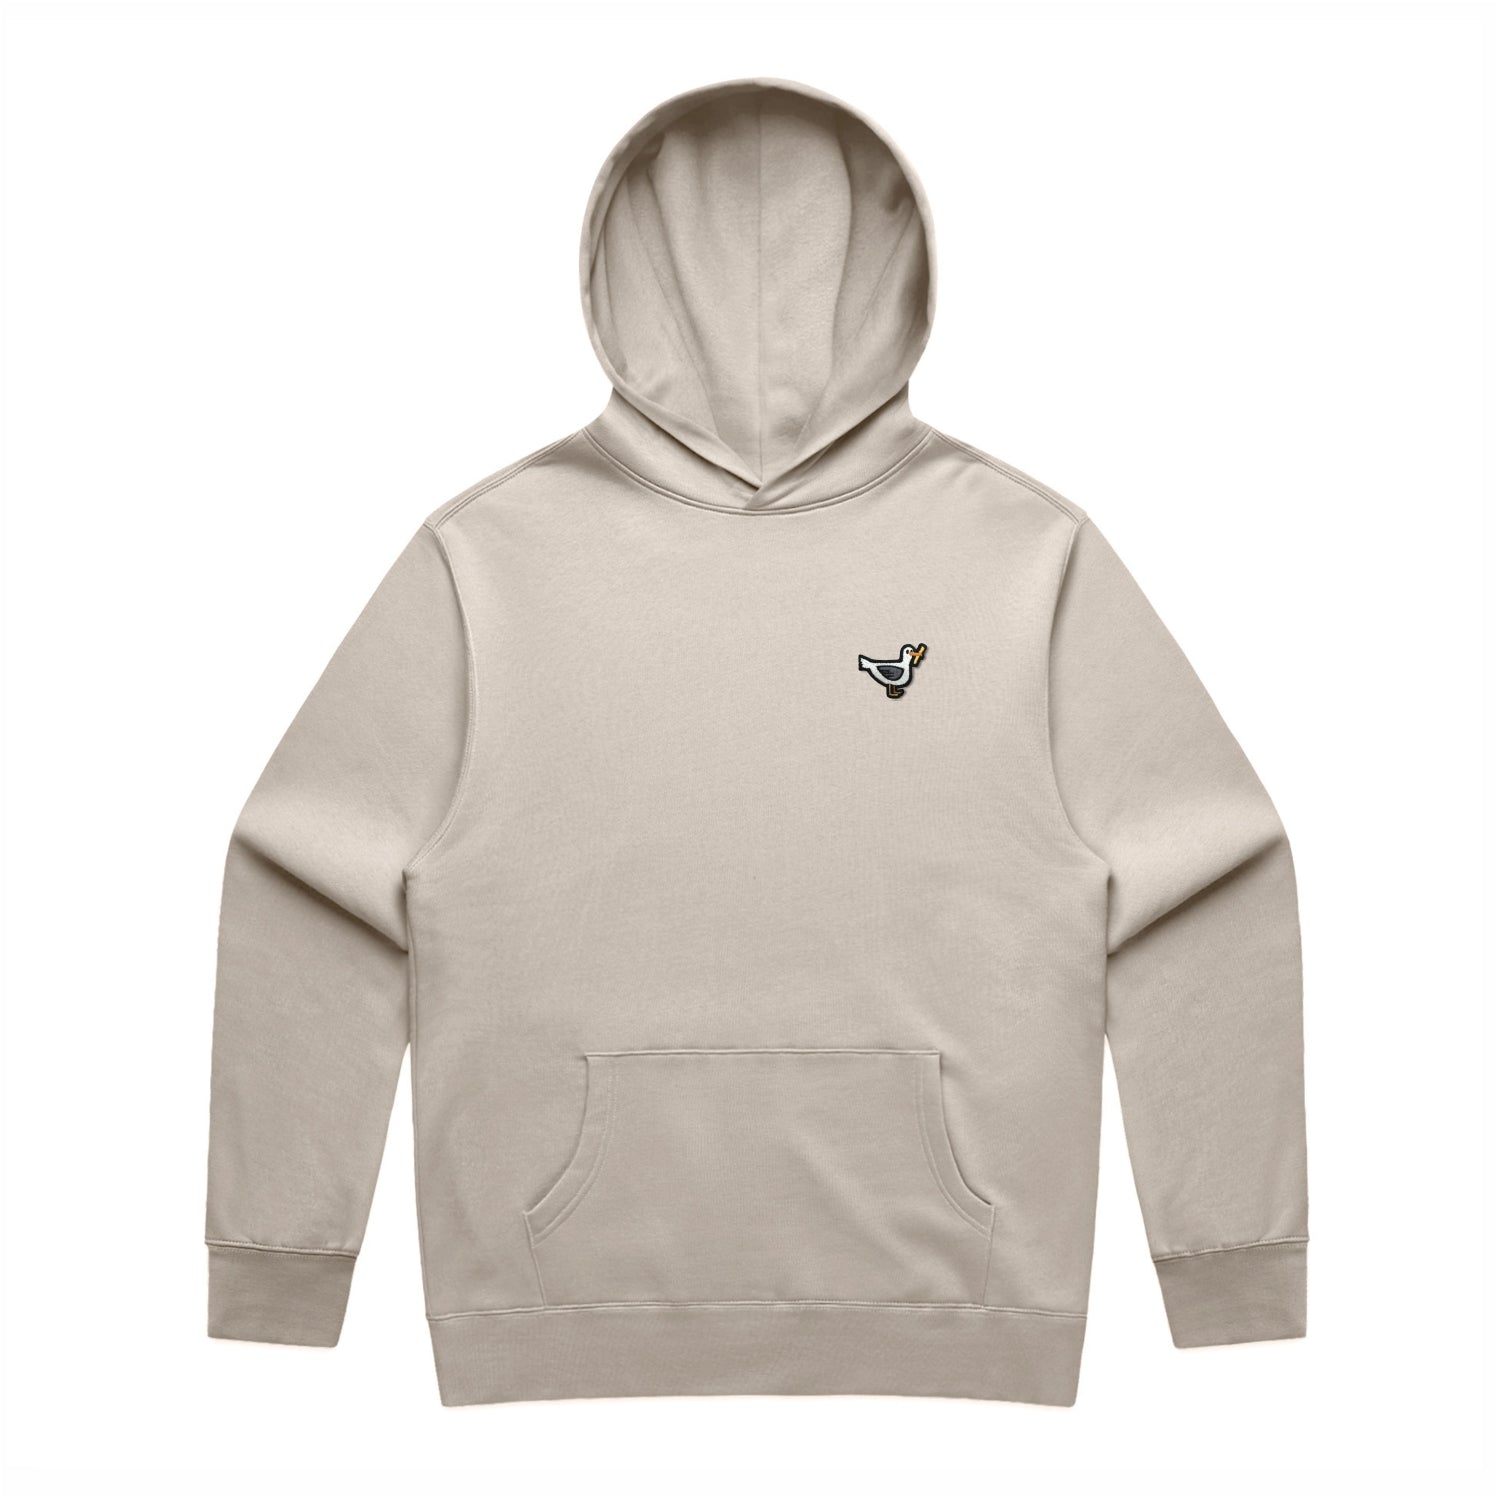 Chip Stealing Bast**d Hoody – Longsands Clothing Co